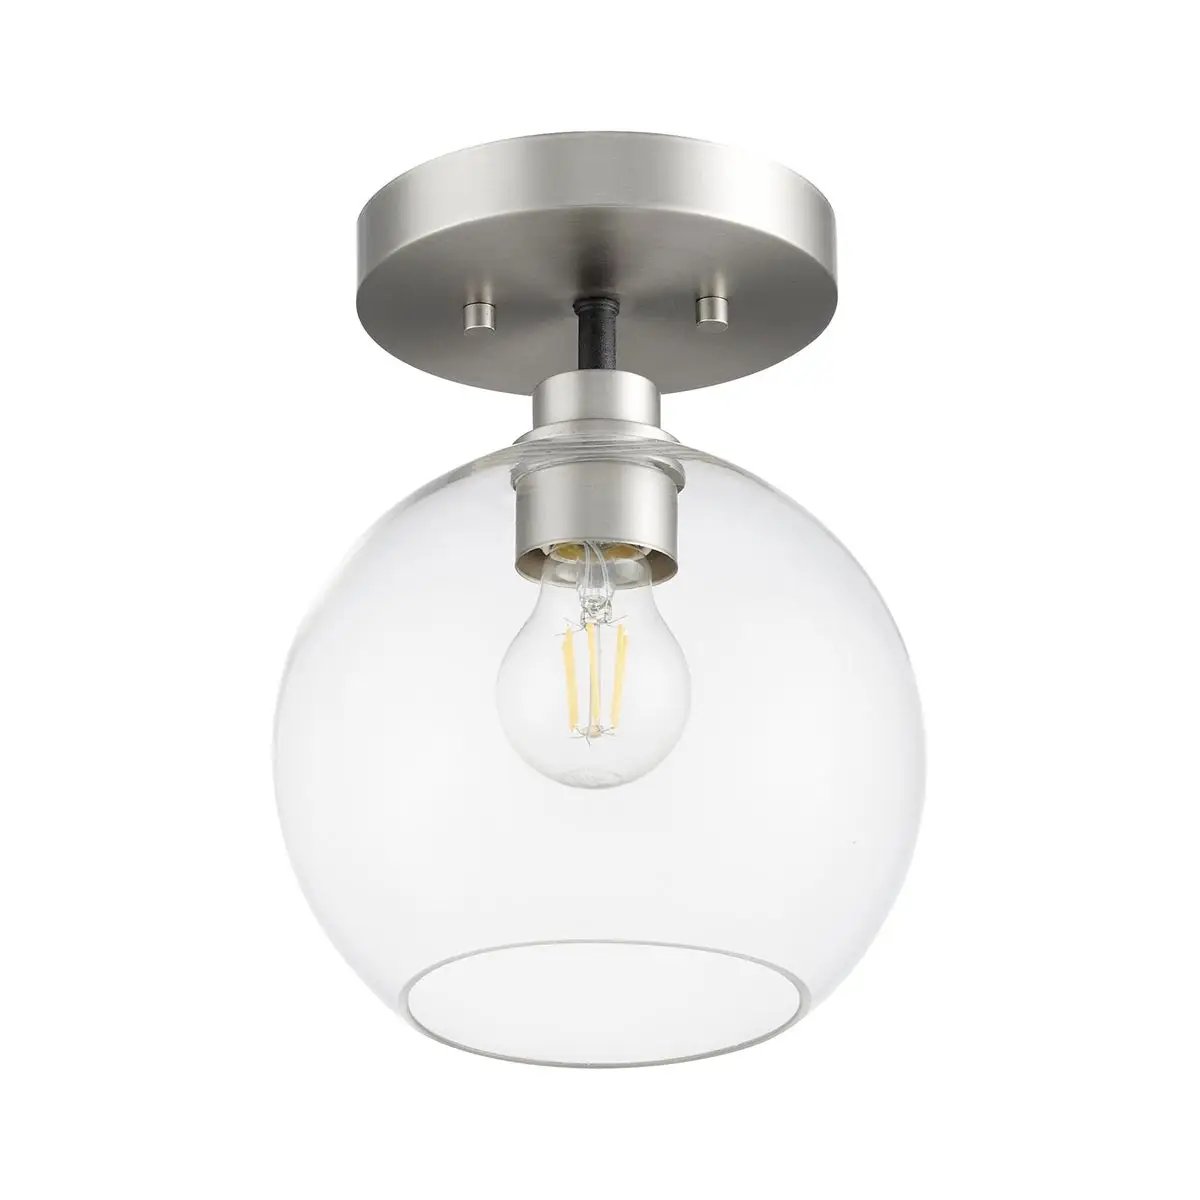 Transitional flush mount lighting with clear glass shade and elegant finishes. Soft diffusion of light for a glowing radiance. Perfect for adding sophistication to any space.